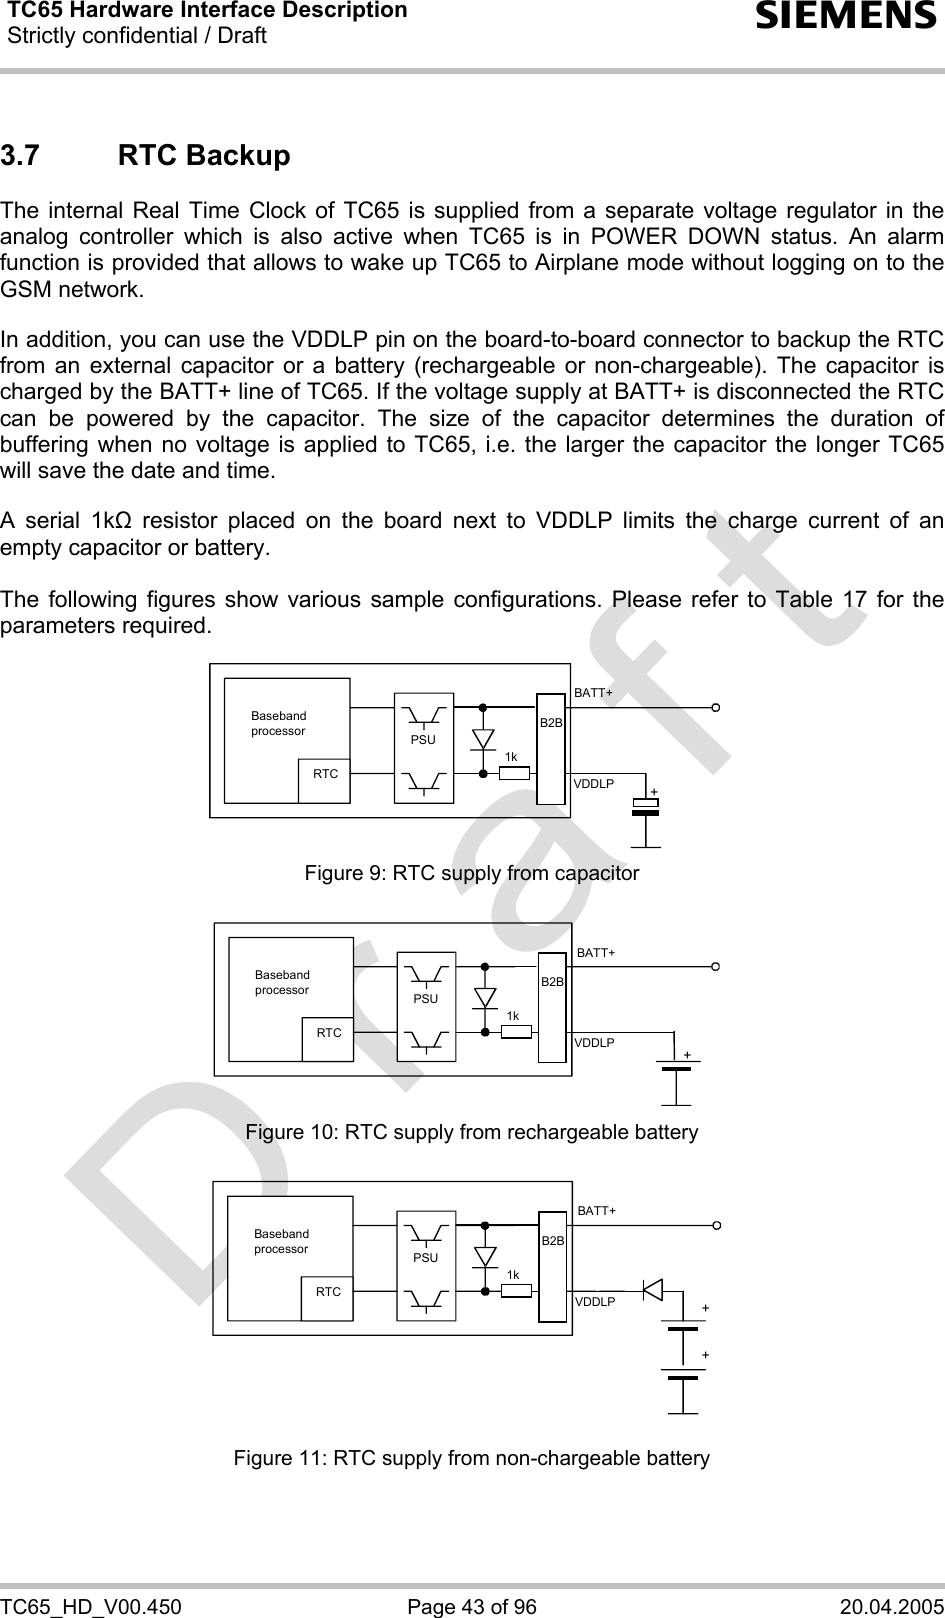 TC65 Hardware Interface Description Strictly confidential / Draft  s TC65_HD_V00.450  Page 43 of 96  20.04.2005 3.7 RTC Backup The internal Real Time Clock of TC65 is supplied from a separate voltage regulator in the analog controller which is also active when TC65 is in POWER DOWN status. An alarm function is provided that allows to wake up TC65 to Airplane mode without logging on to the GSM network.   In addition, you can use the VDDLP pin on the board-to-board connector to backup the RTC from an external capacitor or a battery (rechargeable or non-chargeable). The capacitor is charged by the BATT+ line of TC65. If the voltage supply at BATT+ is disconnected the RTC can be powered by the capacitor. The size of the capacitor determines the duration of buffering when no voltage is applied to TC65, i.e. the larger the capacitor the longer TC65 will save the date and time.   A serial 1k resistor placed on the board next to VDDLP limits the charge current of an empty capacitor or battery.   The following figures show various sample configurations. Please refer to Table 17 for the parameters required.    Baseband processor RTC PSU+BATT+ 1kB2BVDDLP Figure 9: RTC supply from capacitor   RTC +BATT+ 1kB2BVDDLPBaseband processor PSU Figure 10: RTC supply from rechargeable battery   RTC ++BATT+ 1kVDDLPB2BBaseband processor PSU Figure 11: RTC supply from non-chargeable battery 